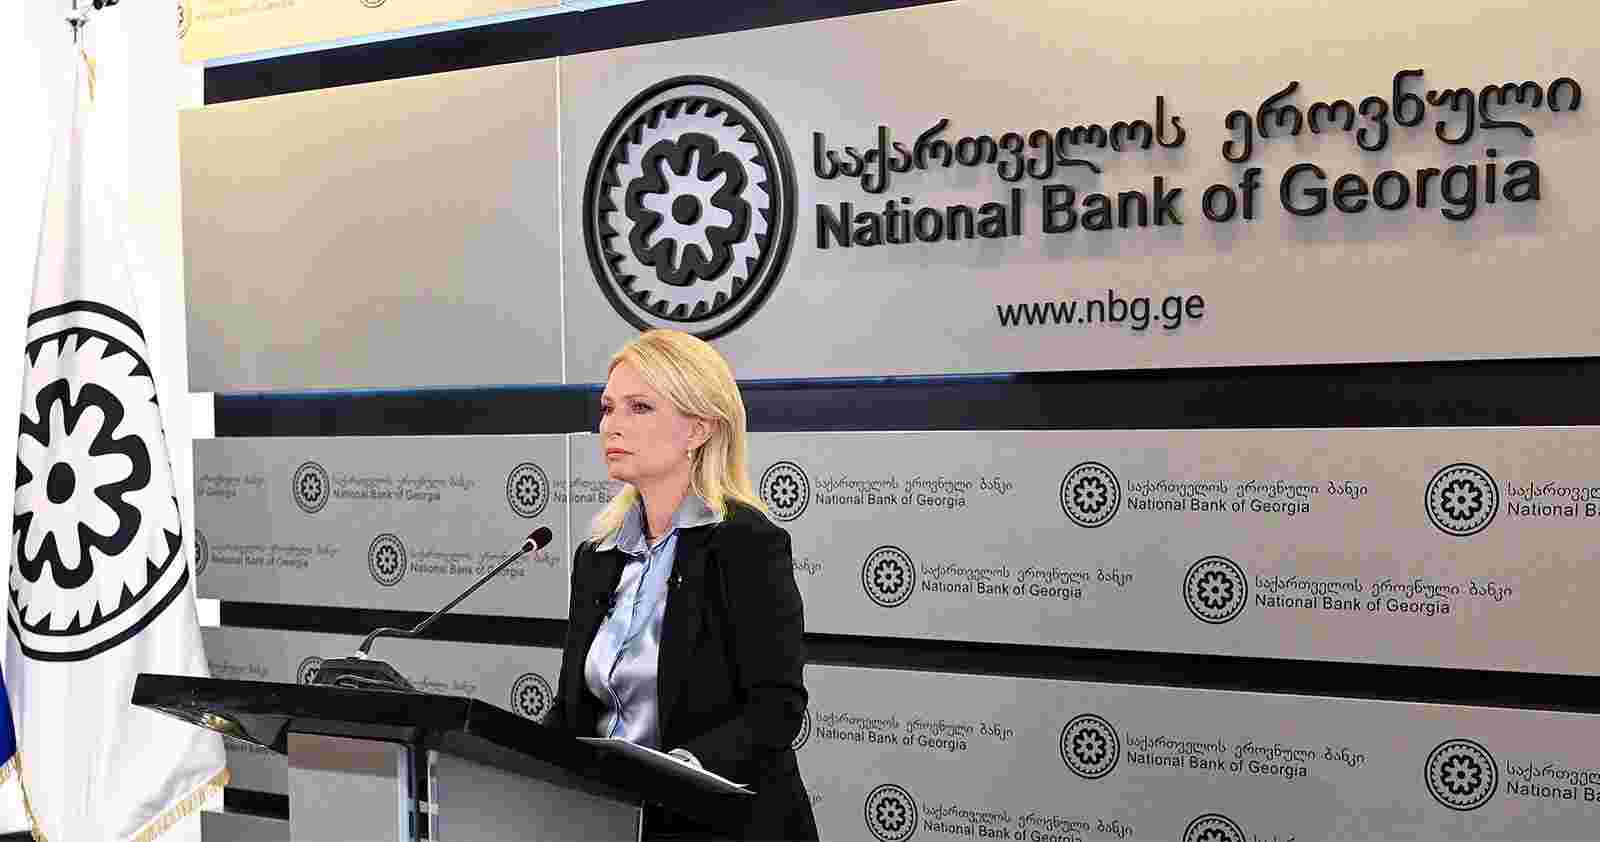 THE NATIONAL BANK OF GEORGIA HAS DECREASED ITS MONETARY POLICY RATE BY 0.25 PERCENTAGE POINTS, TO 10.25 PERCENT